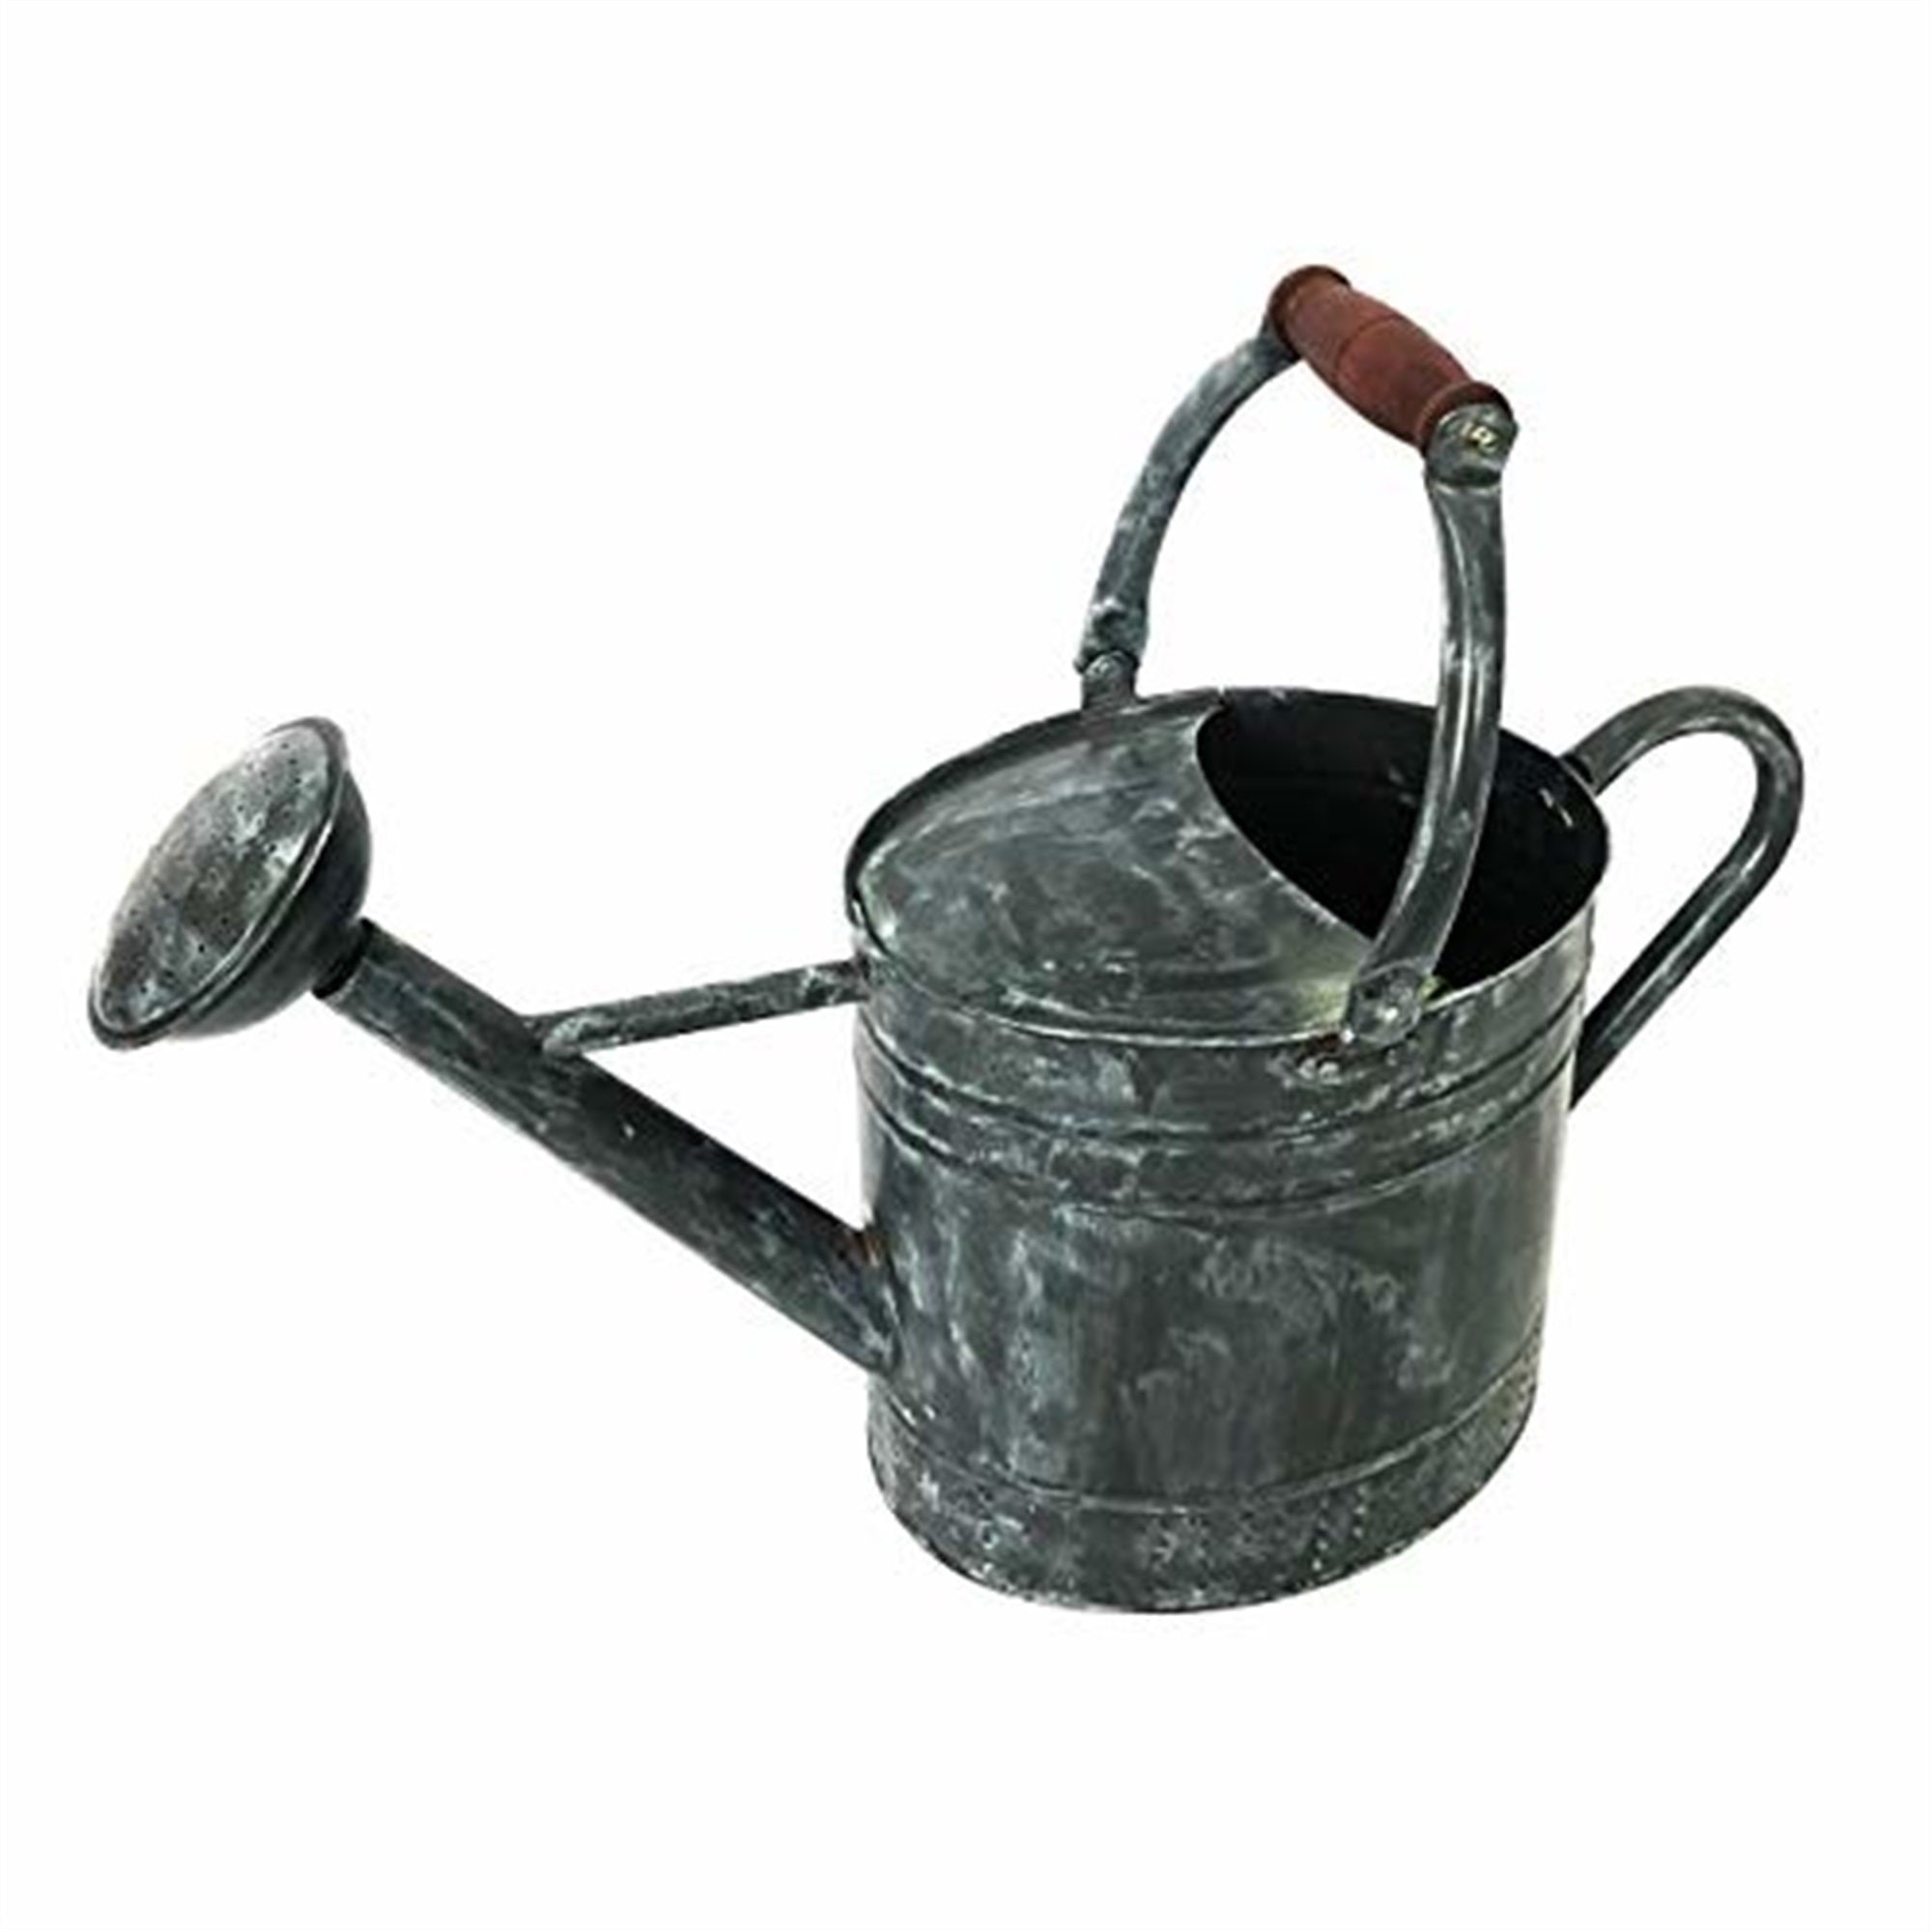 Gardener Select Metal Oval Watering Can, Black, 7L (1.85 gallons)